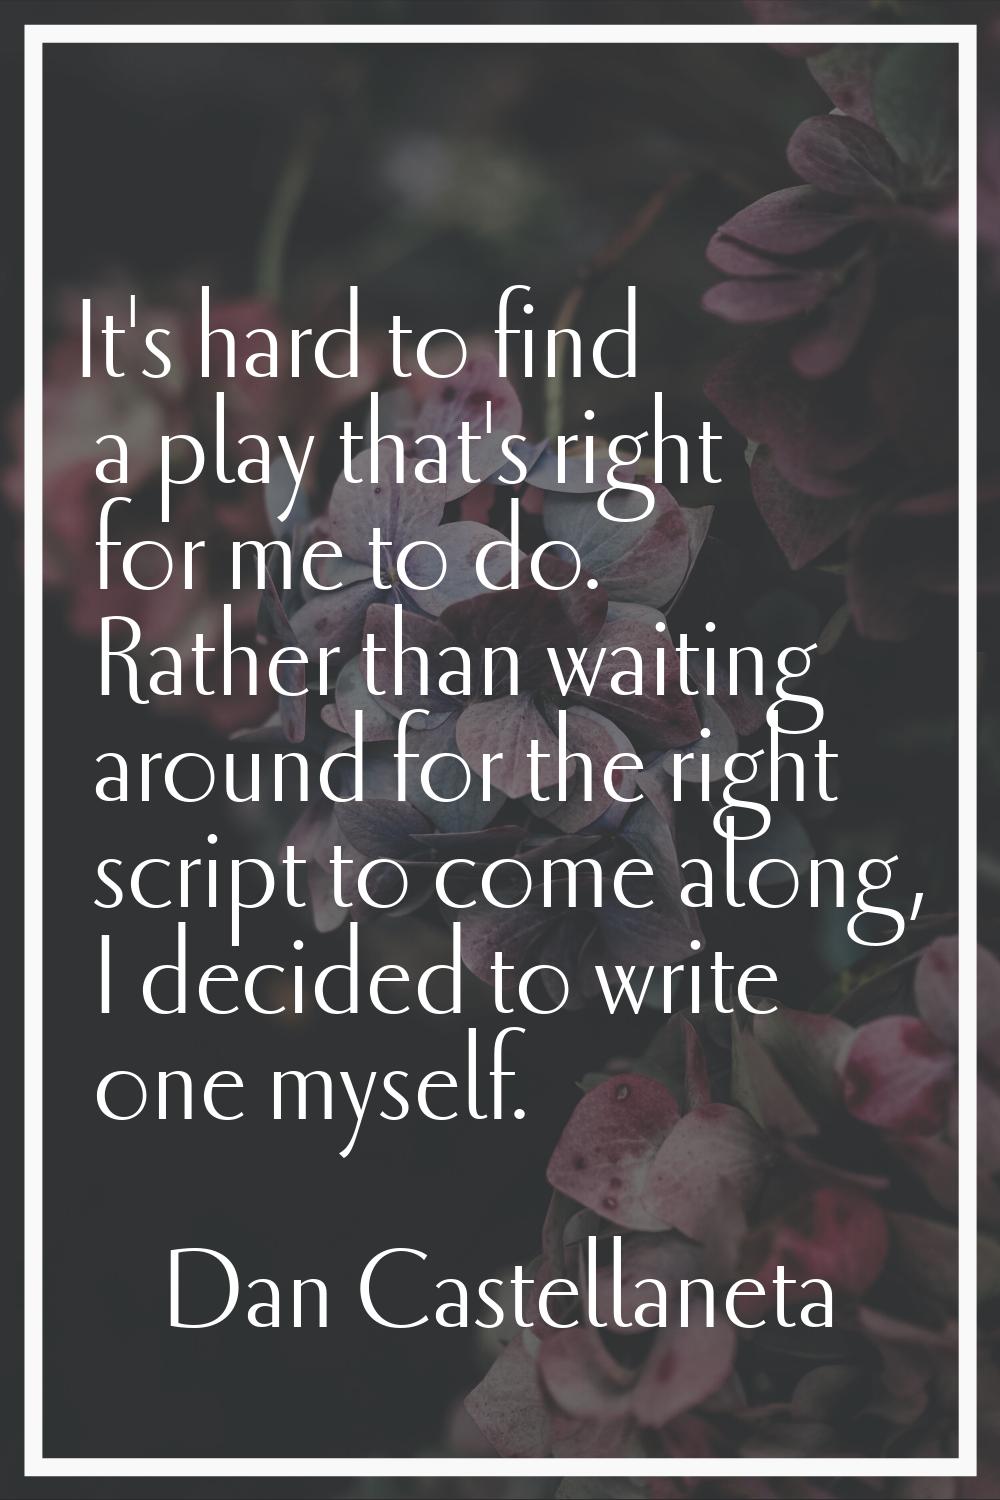 It's hard to find a play that's right for me to do. Rather than waiting around for the right script